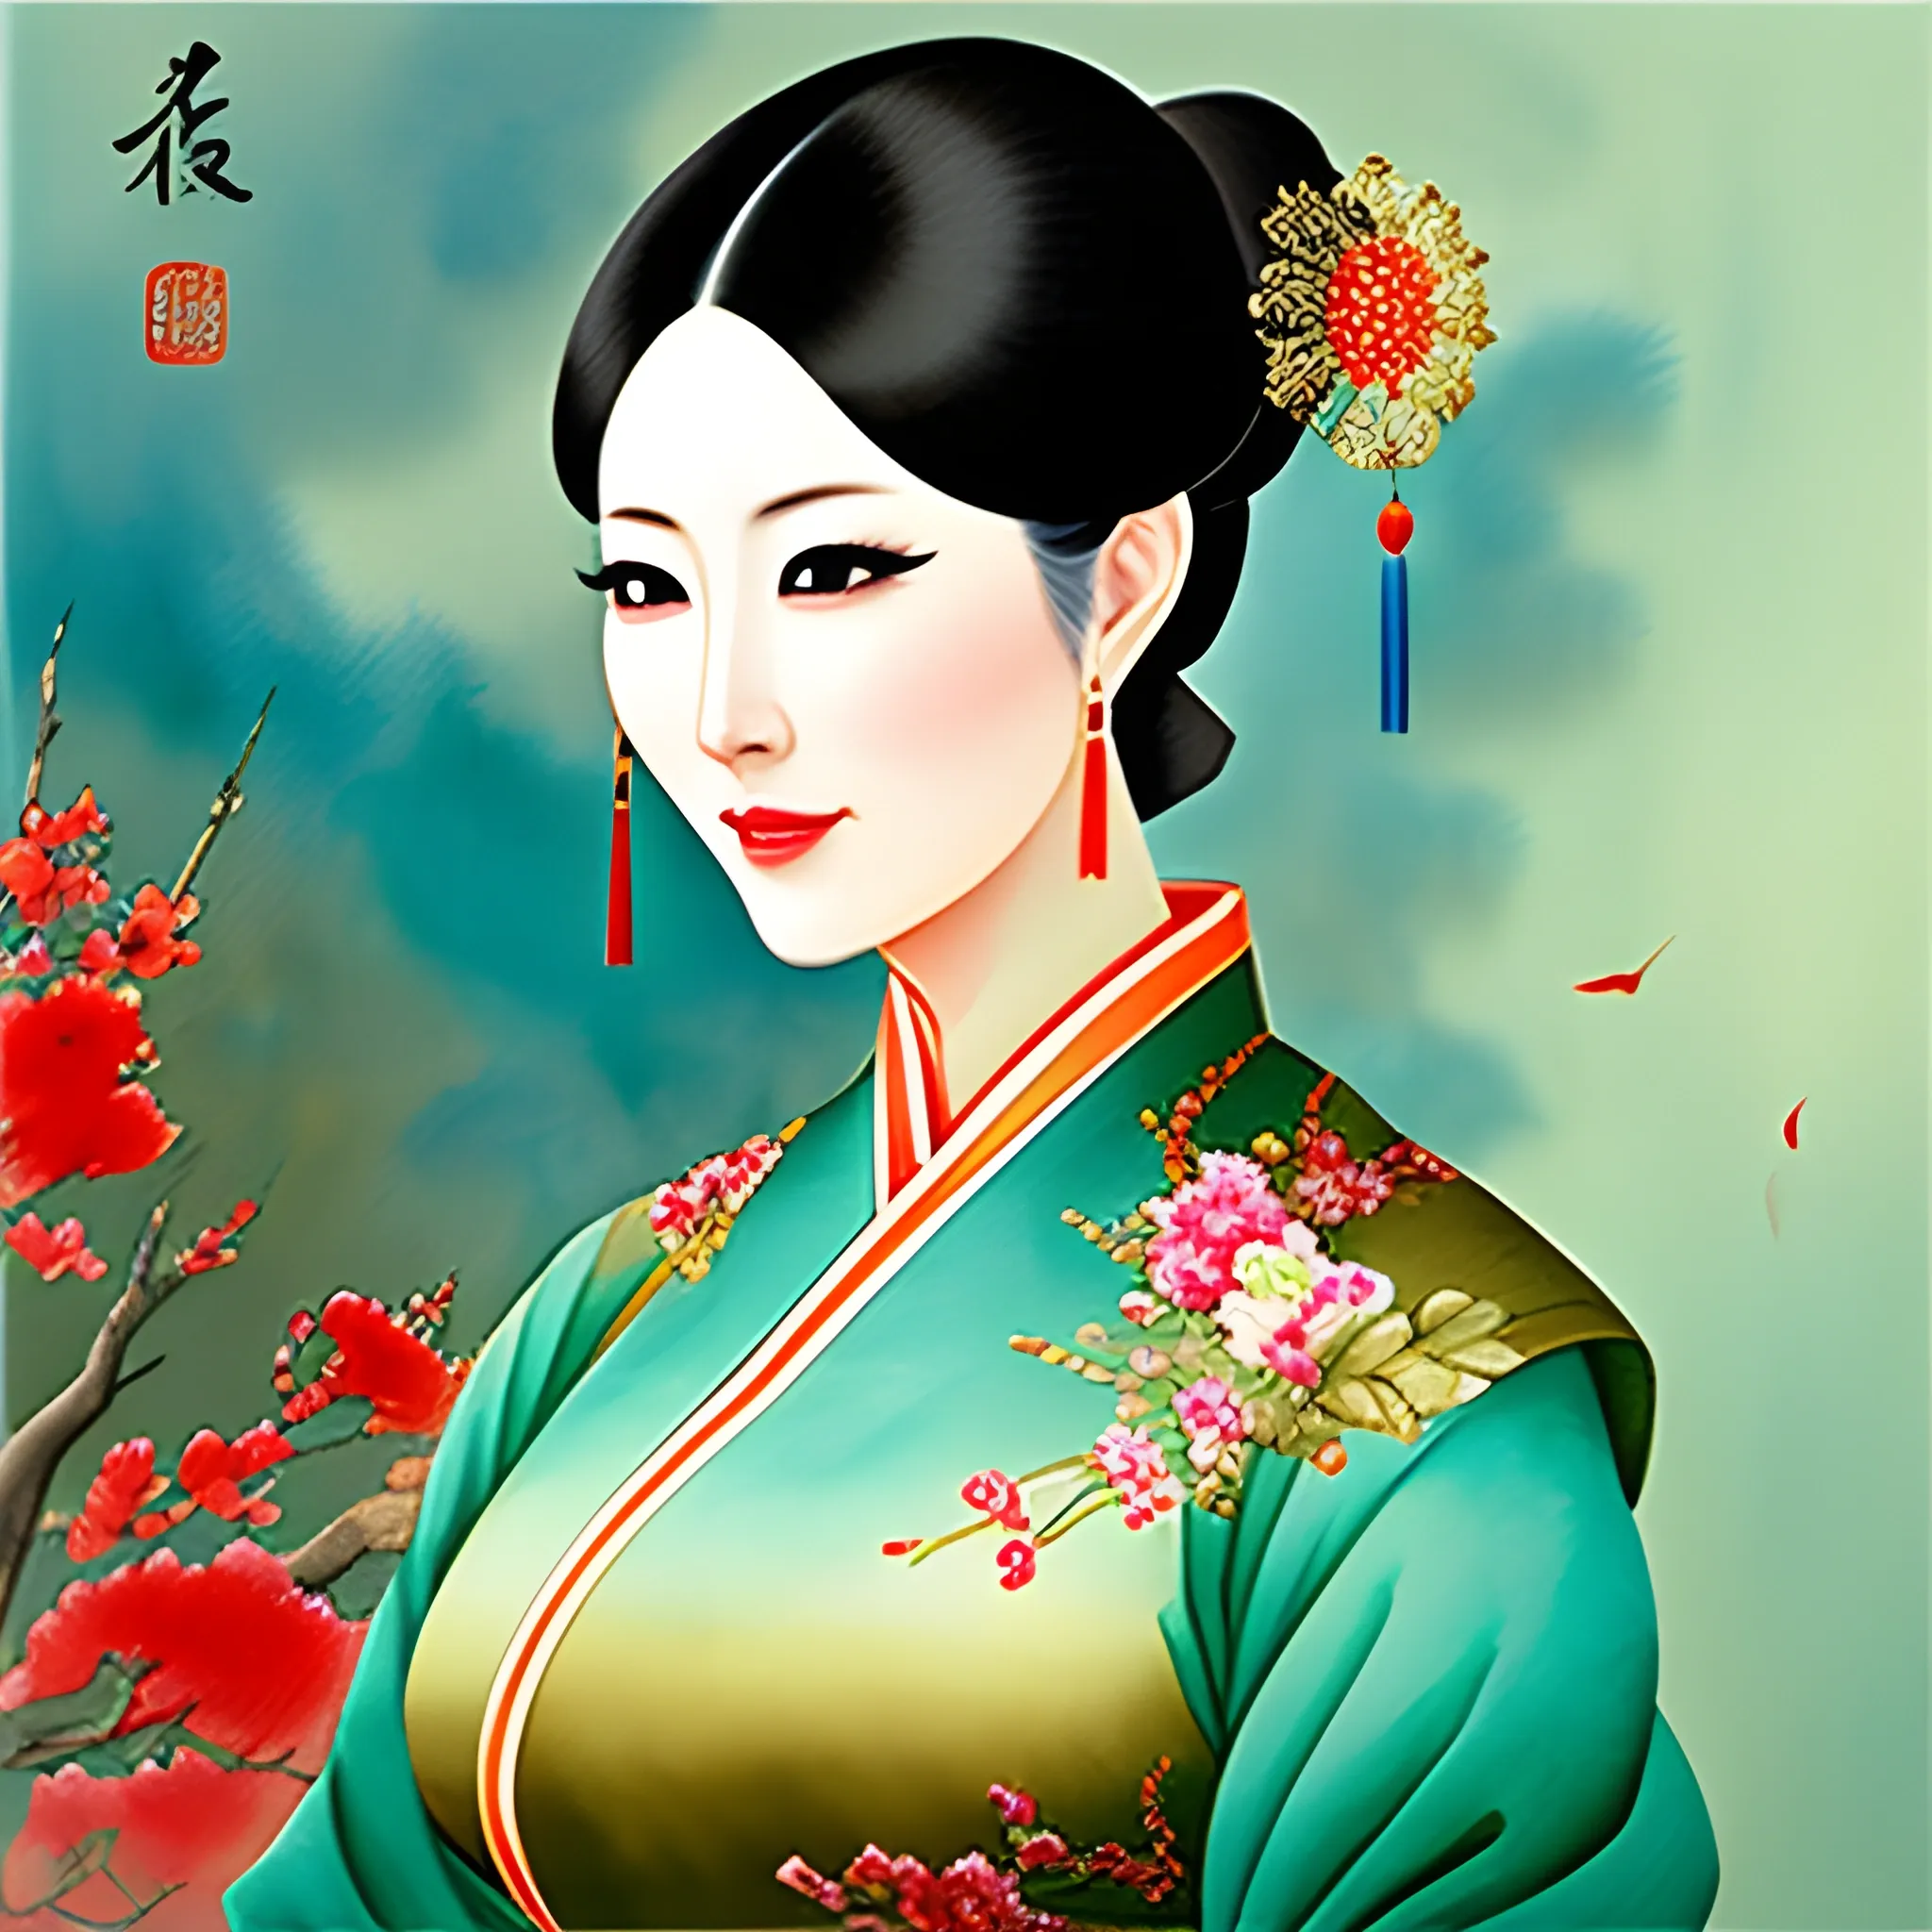 BeautifulChinese girl in traditional clothes, elegant, master paintings, Water Color